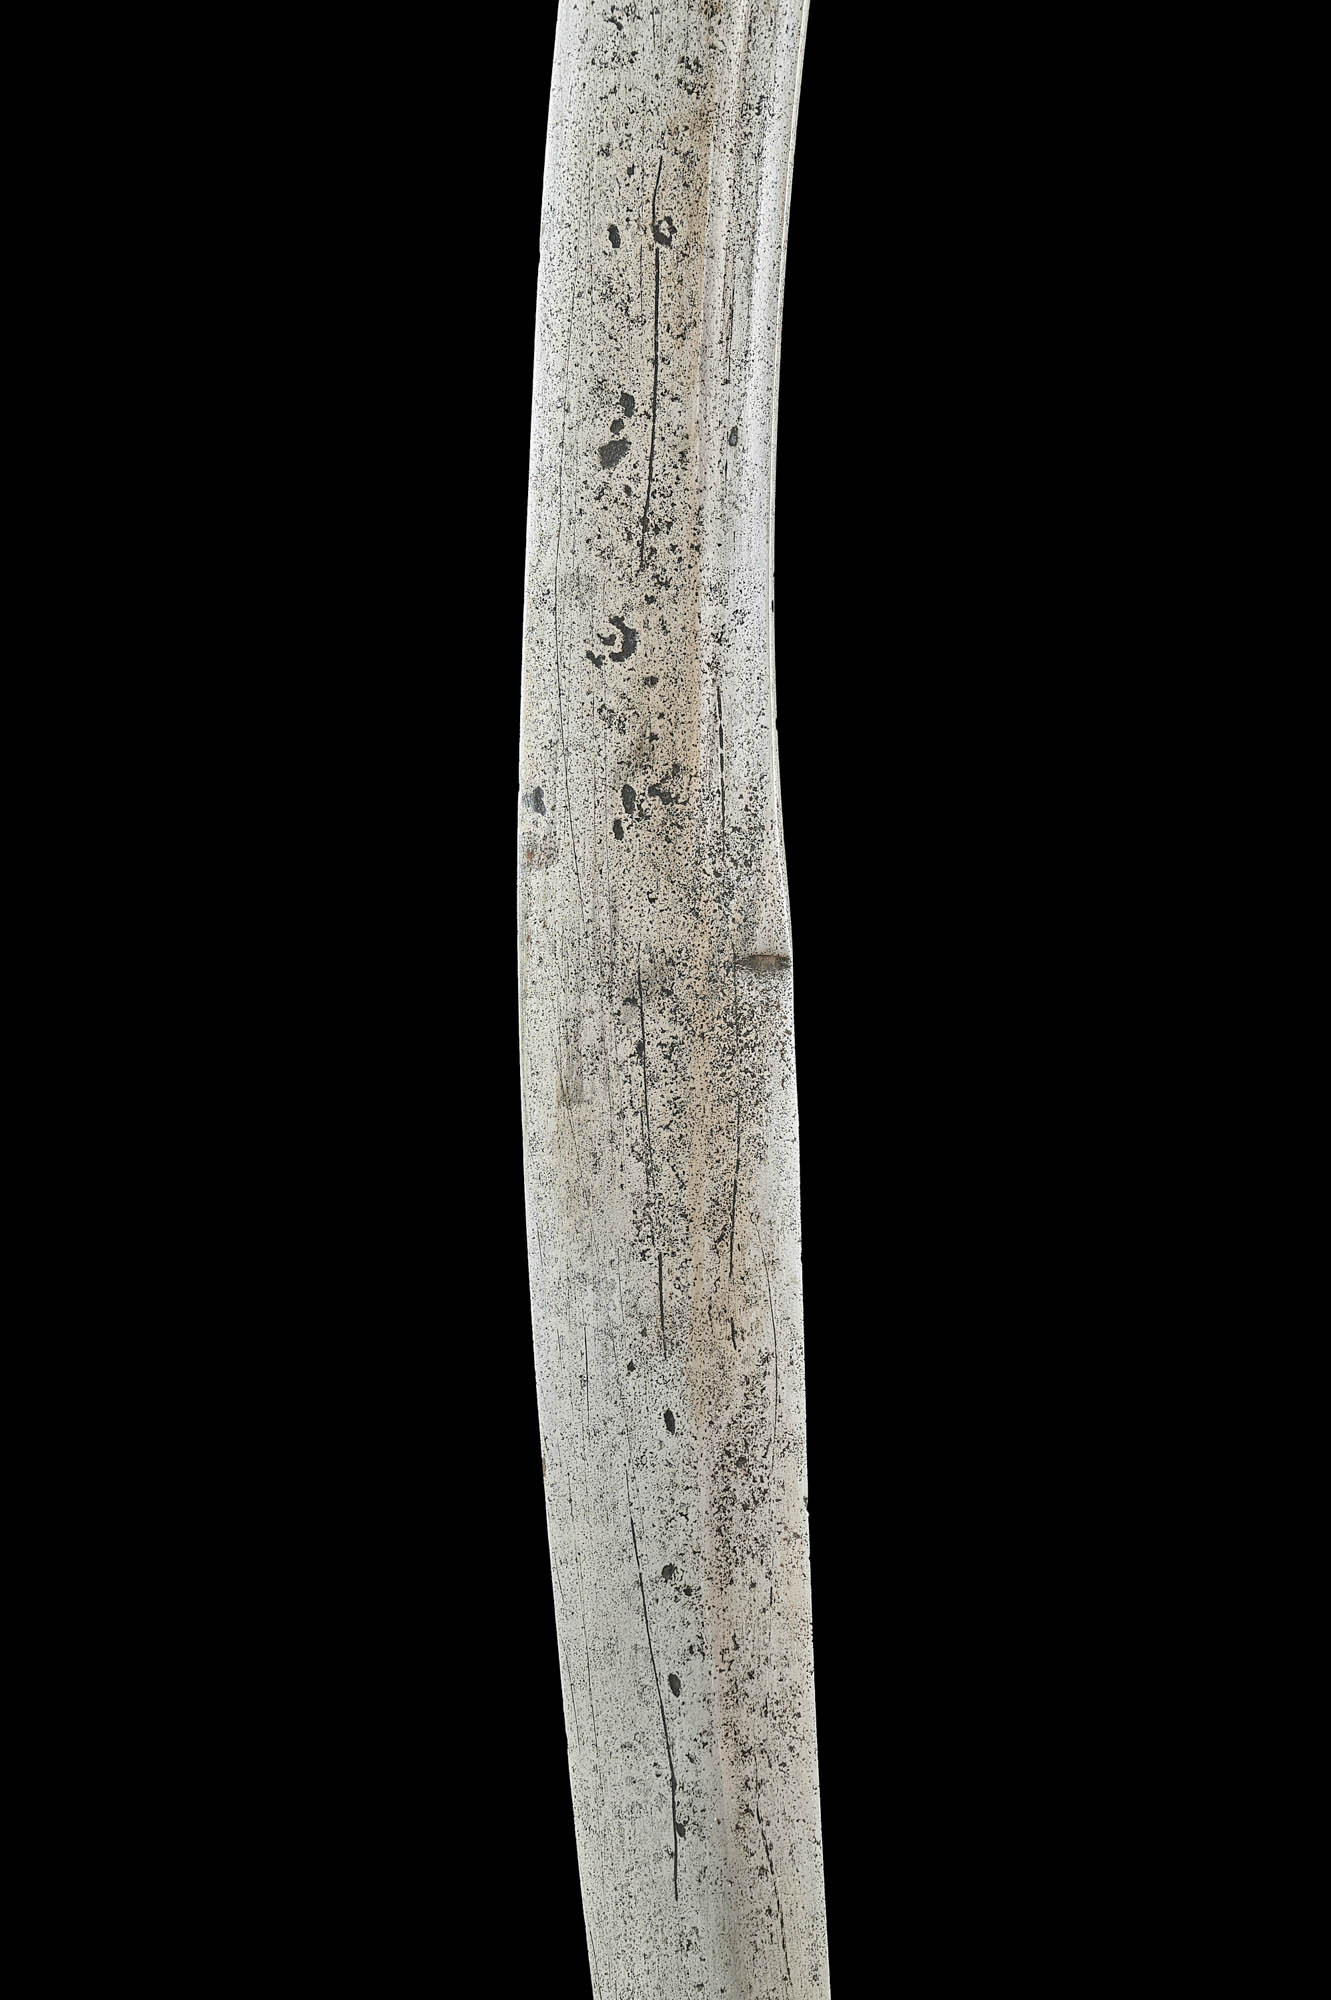 TATAR SABER SWORD DECORATED WITH RHOMBS - Image 9 of 21